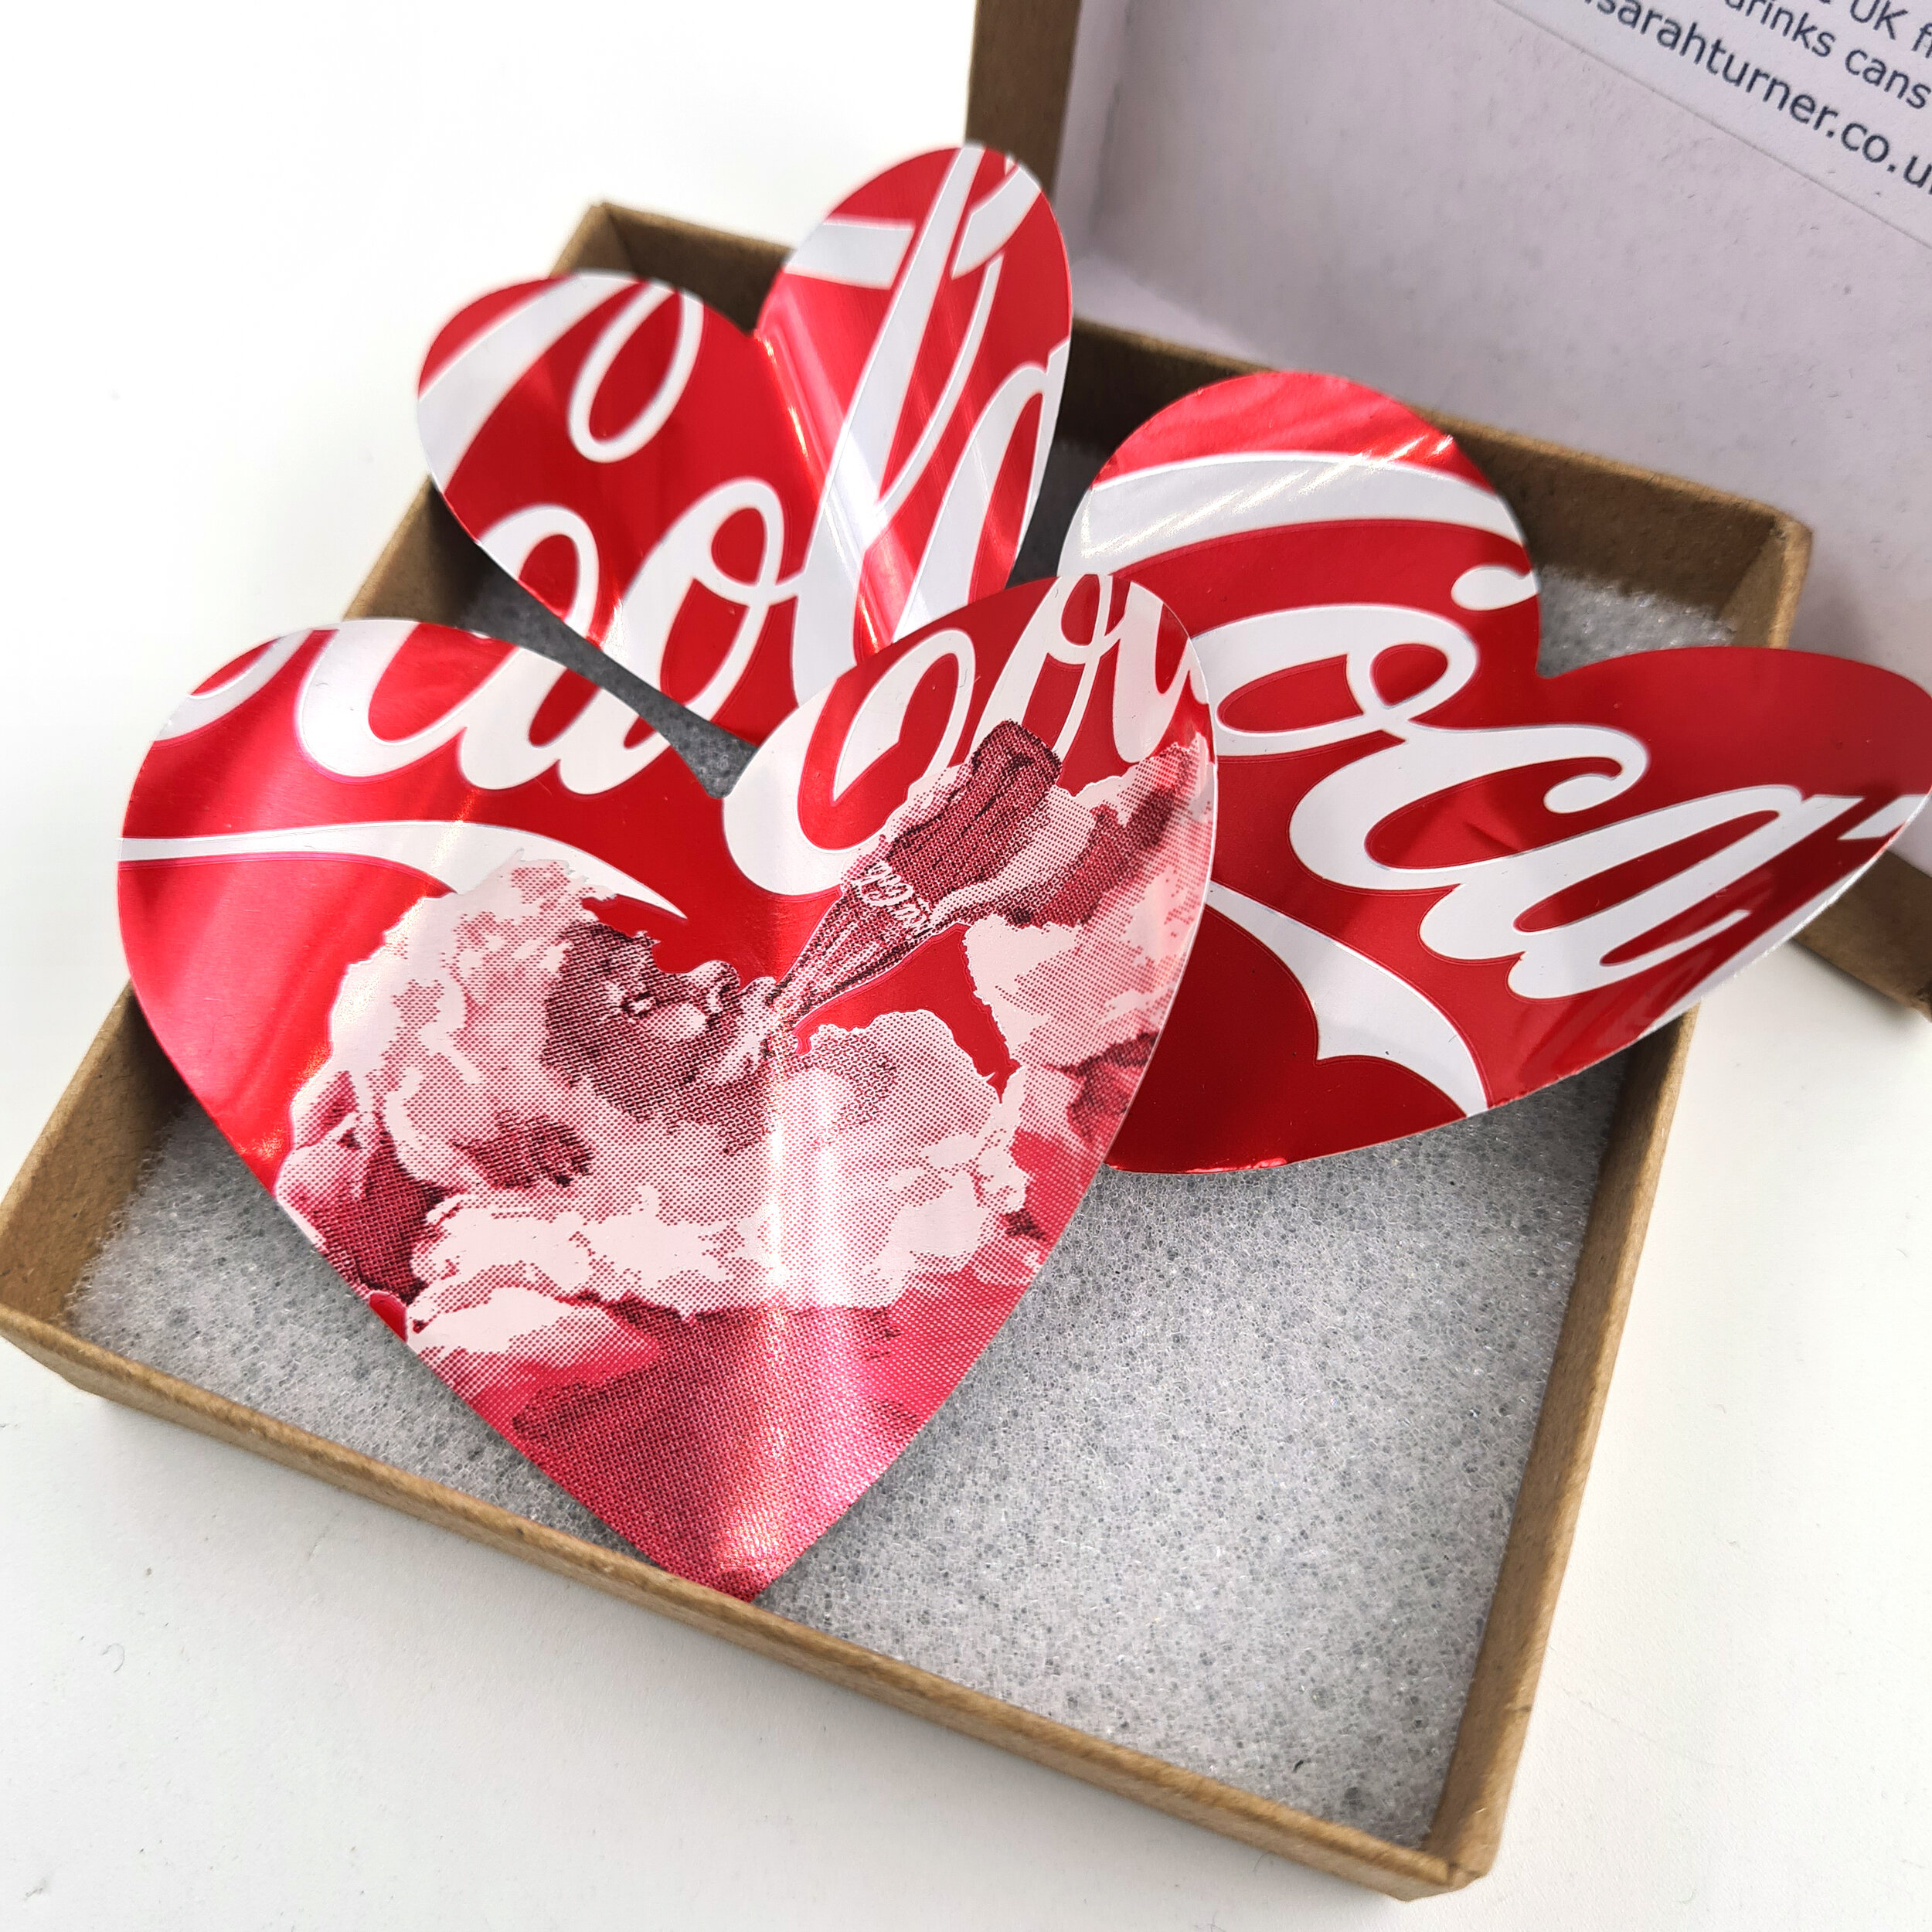 Special festive Santa Coca-Cola hand made Heart Can Magnets in sustainable box 